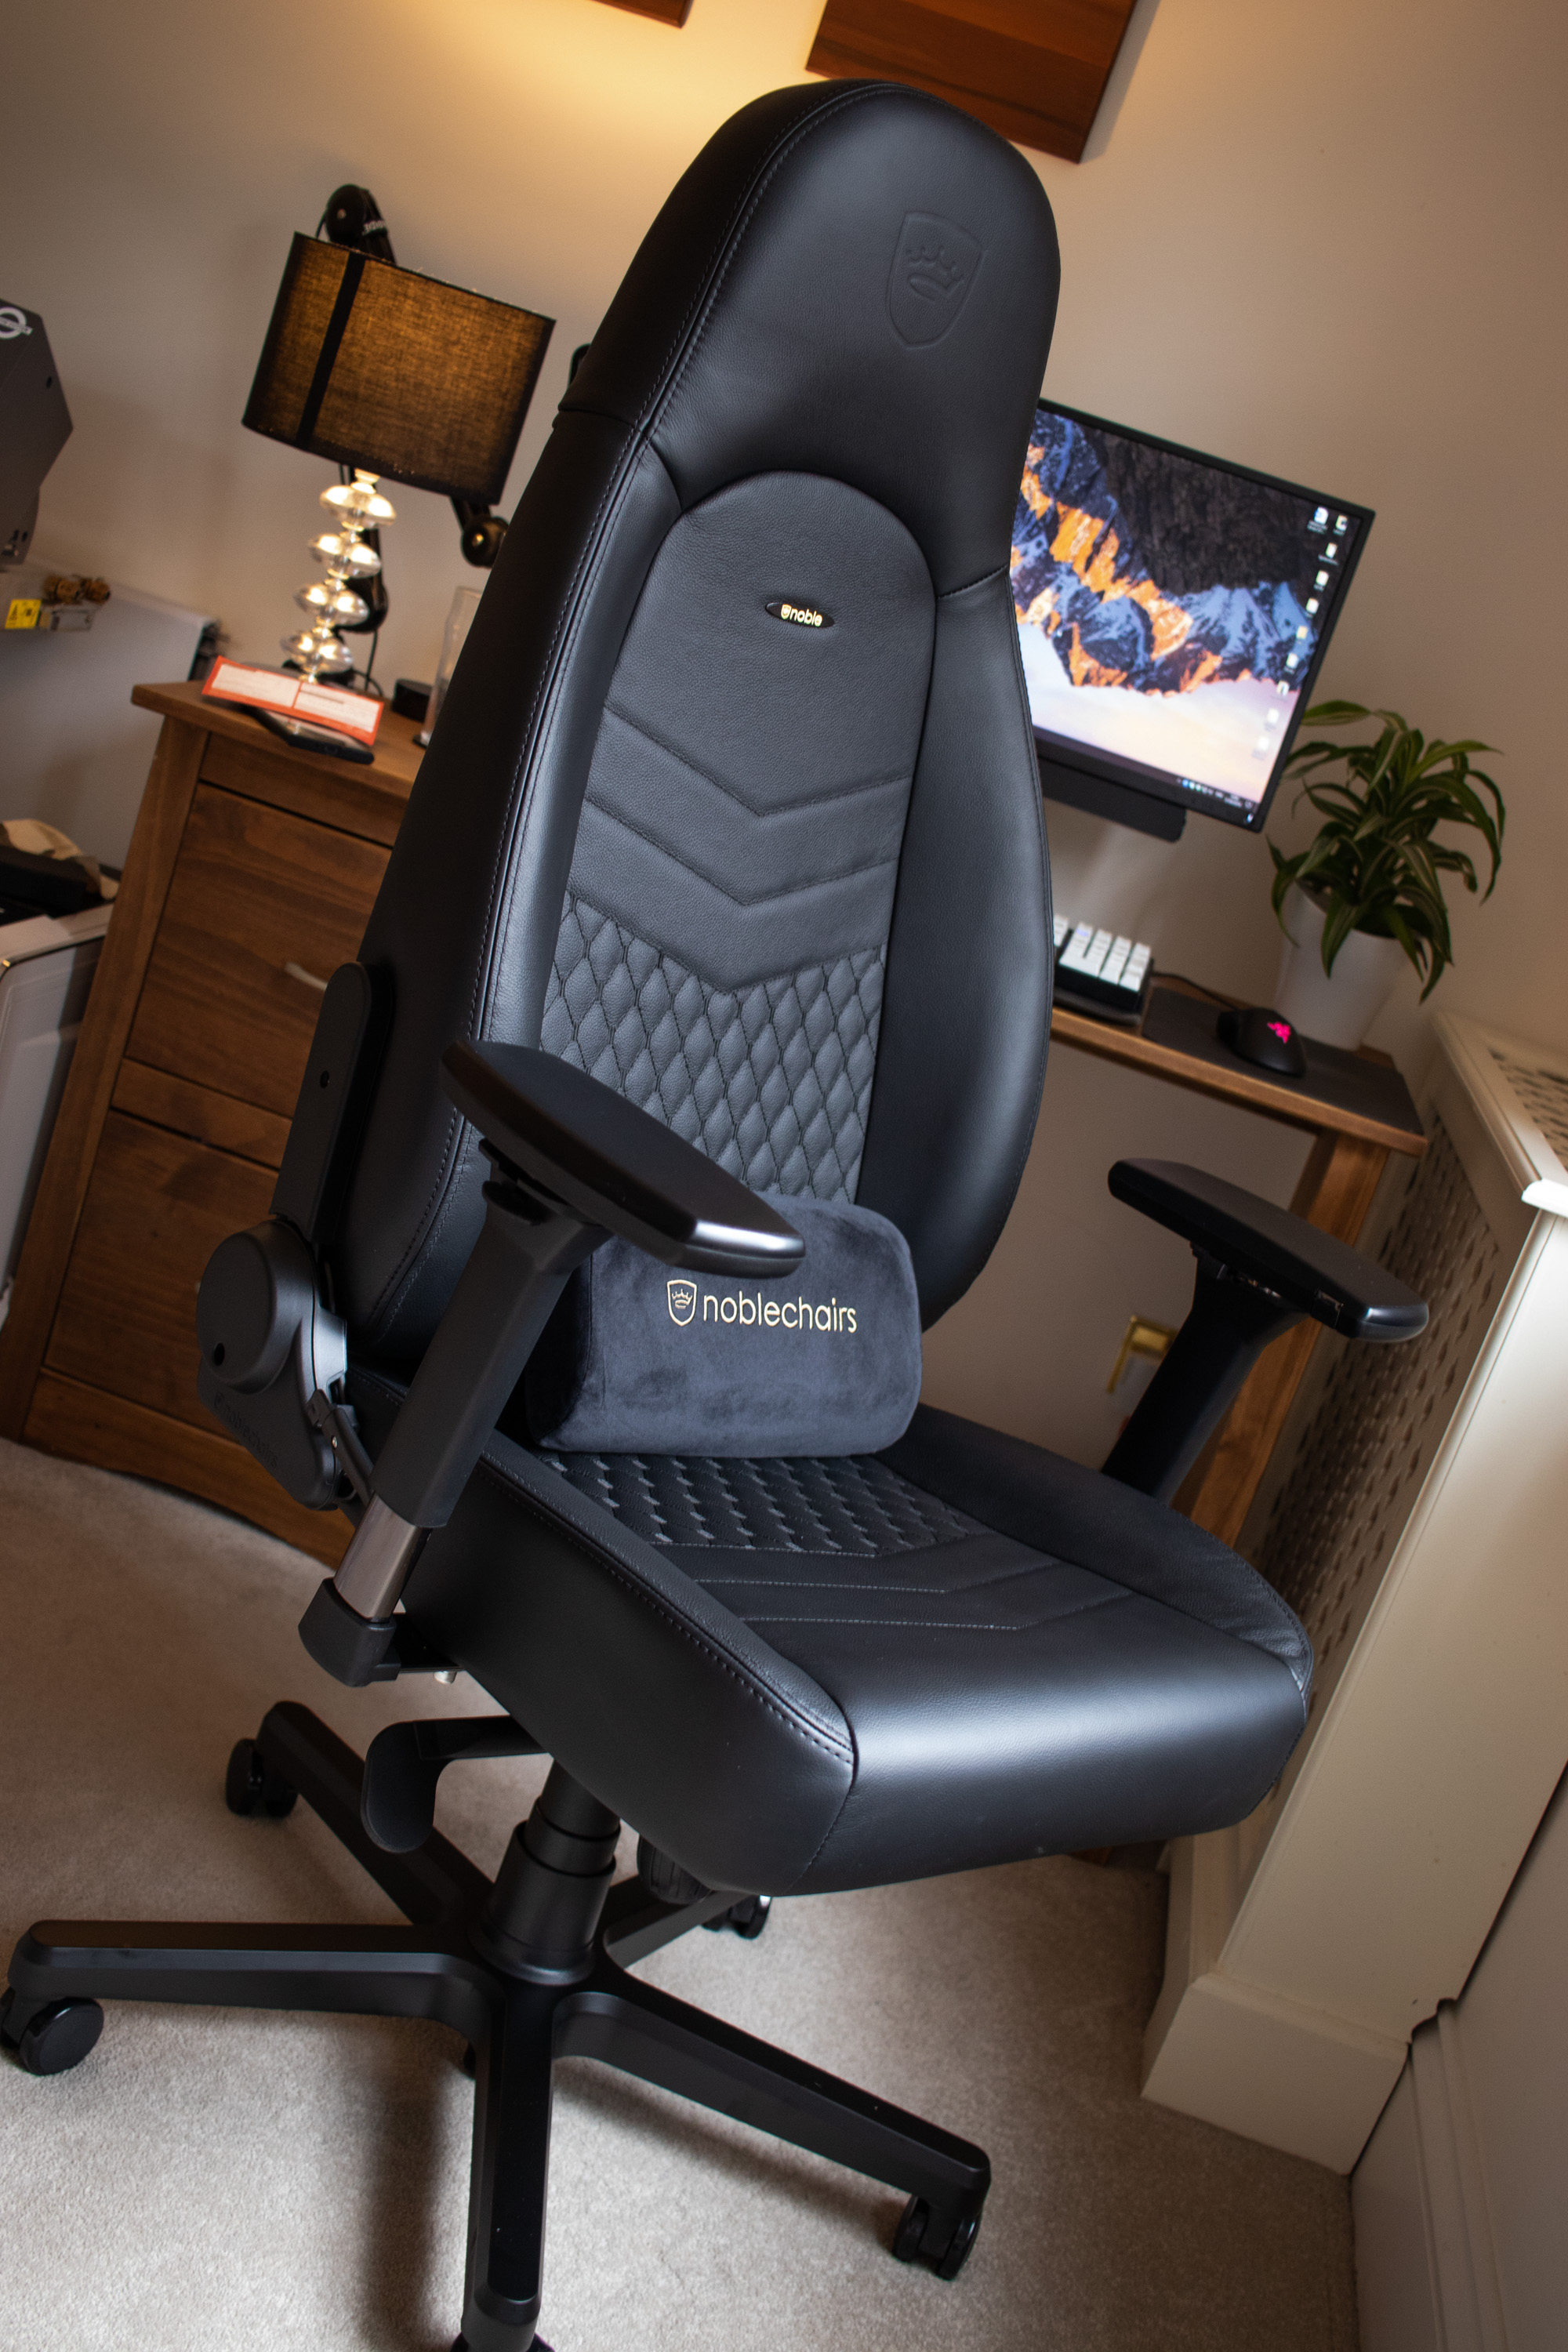 Honest Noblechairs Icon Gaming Chair Review - Real Leather